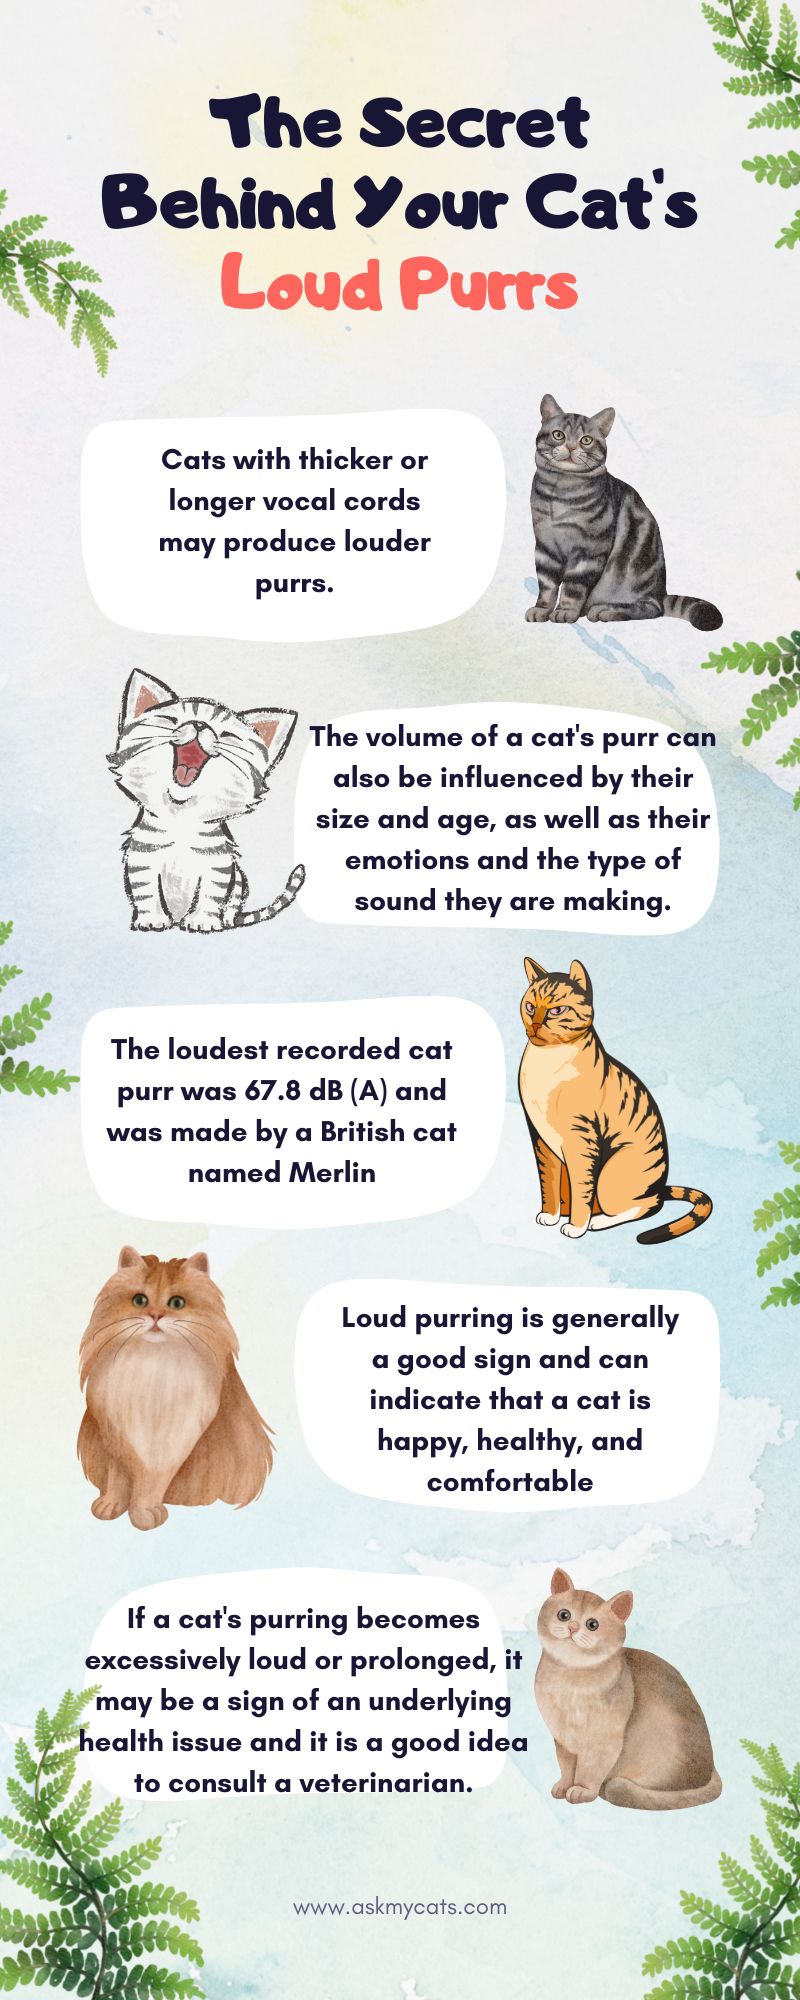 The Secret Behind Your Cats Loud Purrs(Infographic)